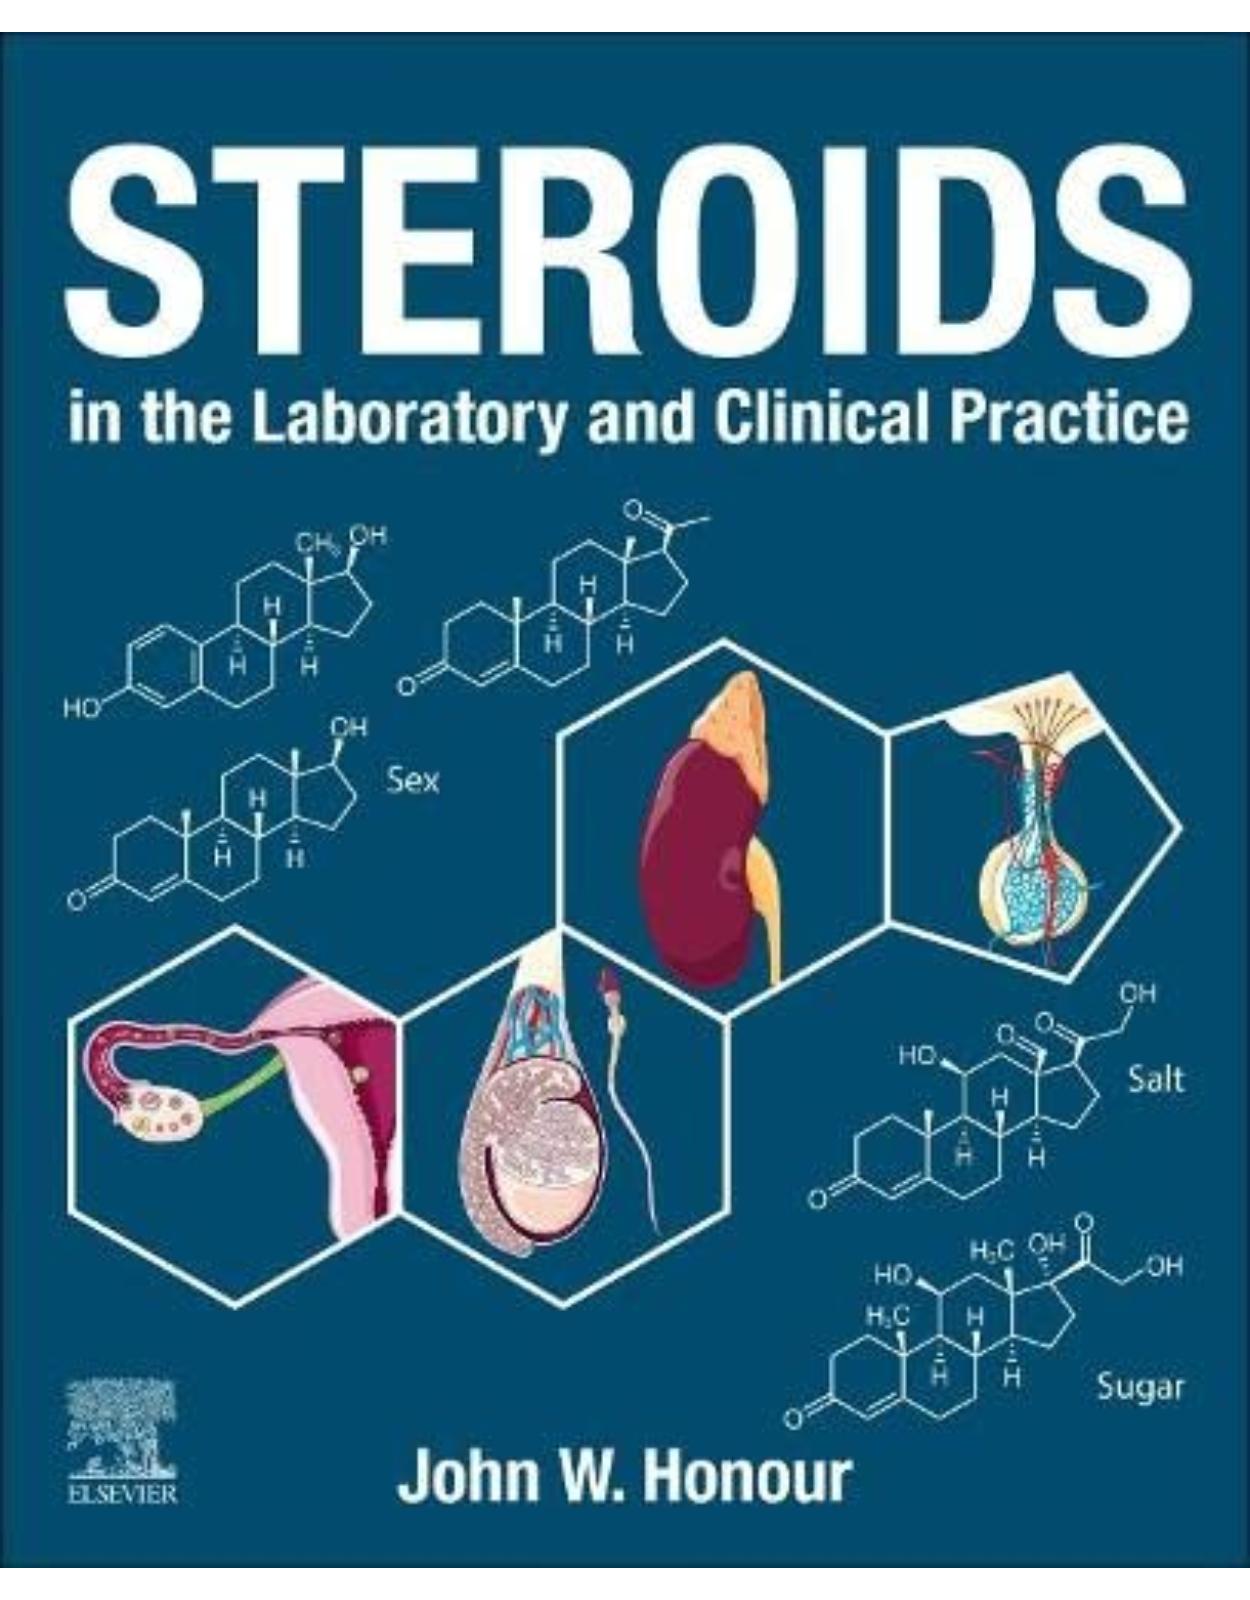 Steroids in the Laboratory and Clinical Practice